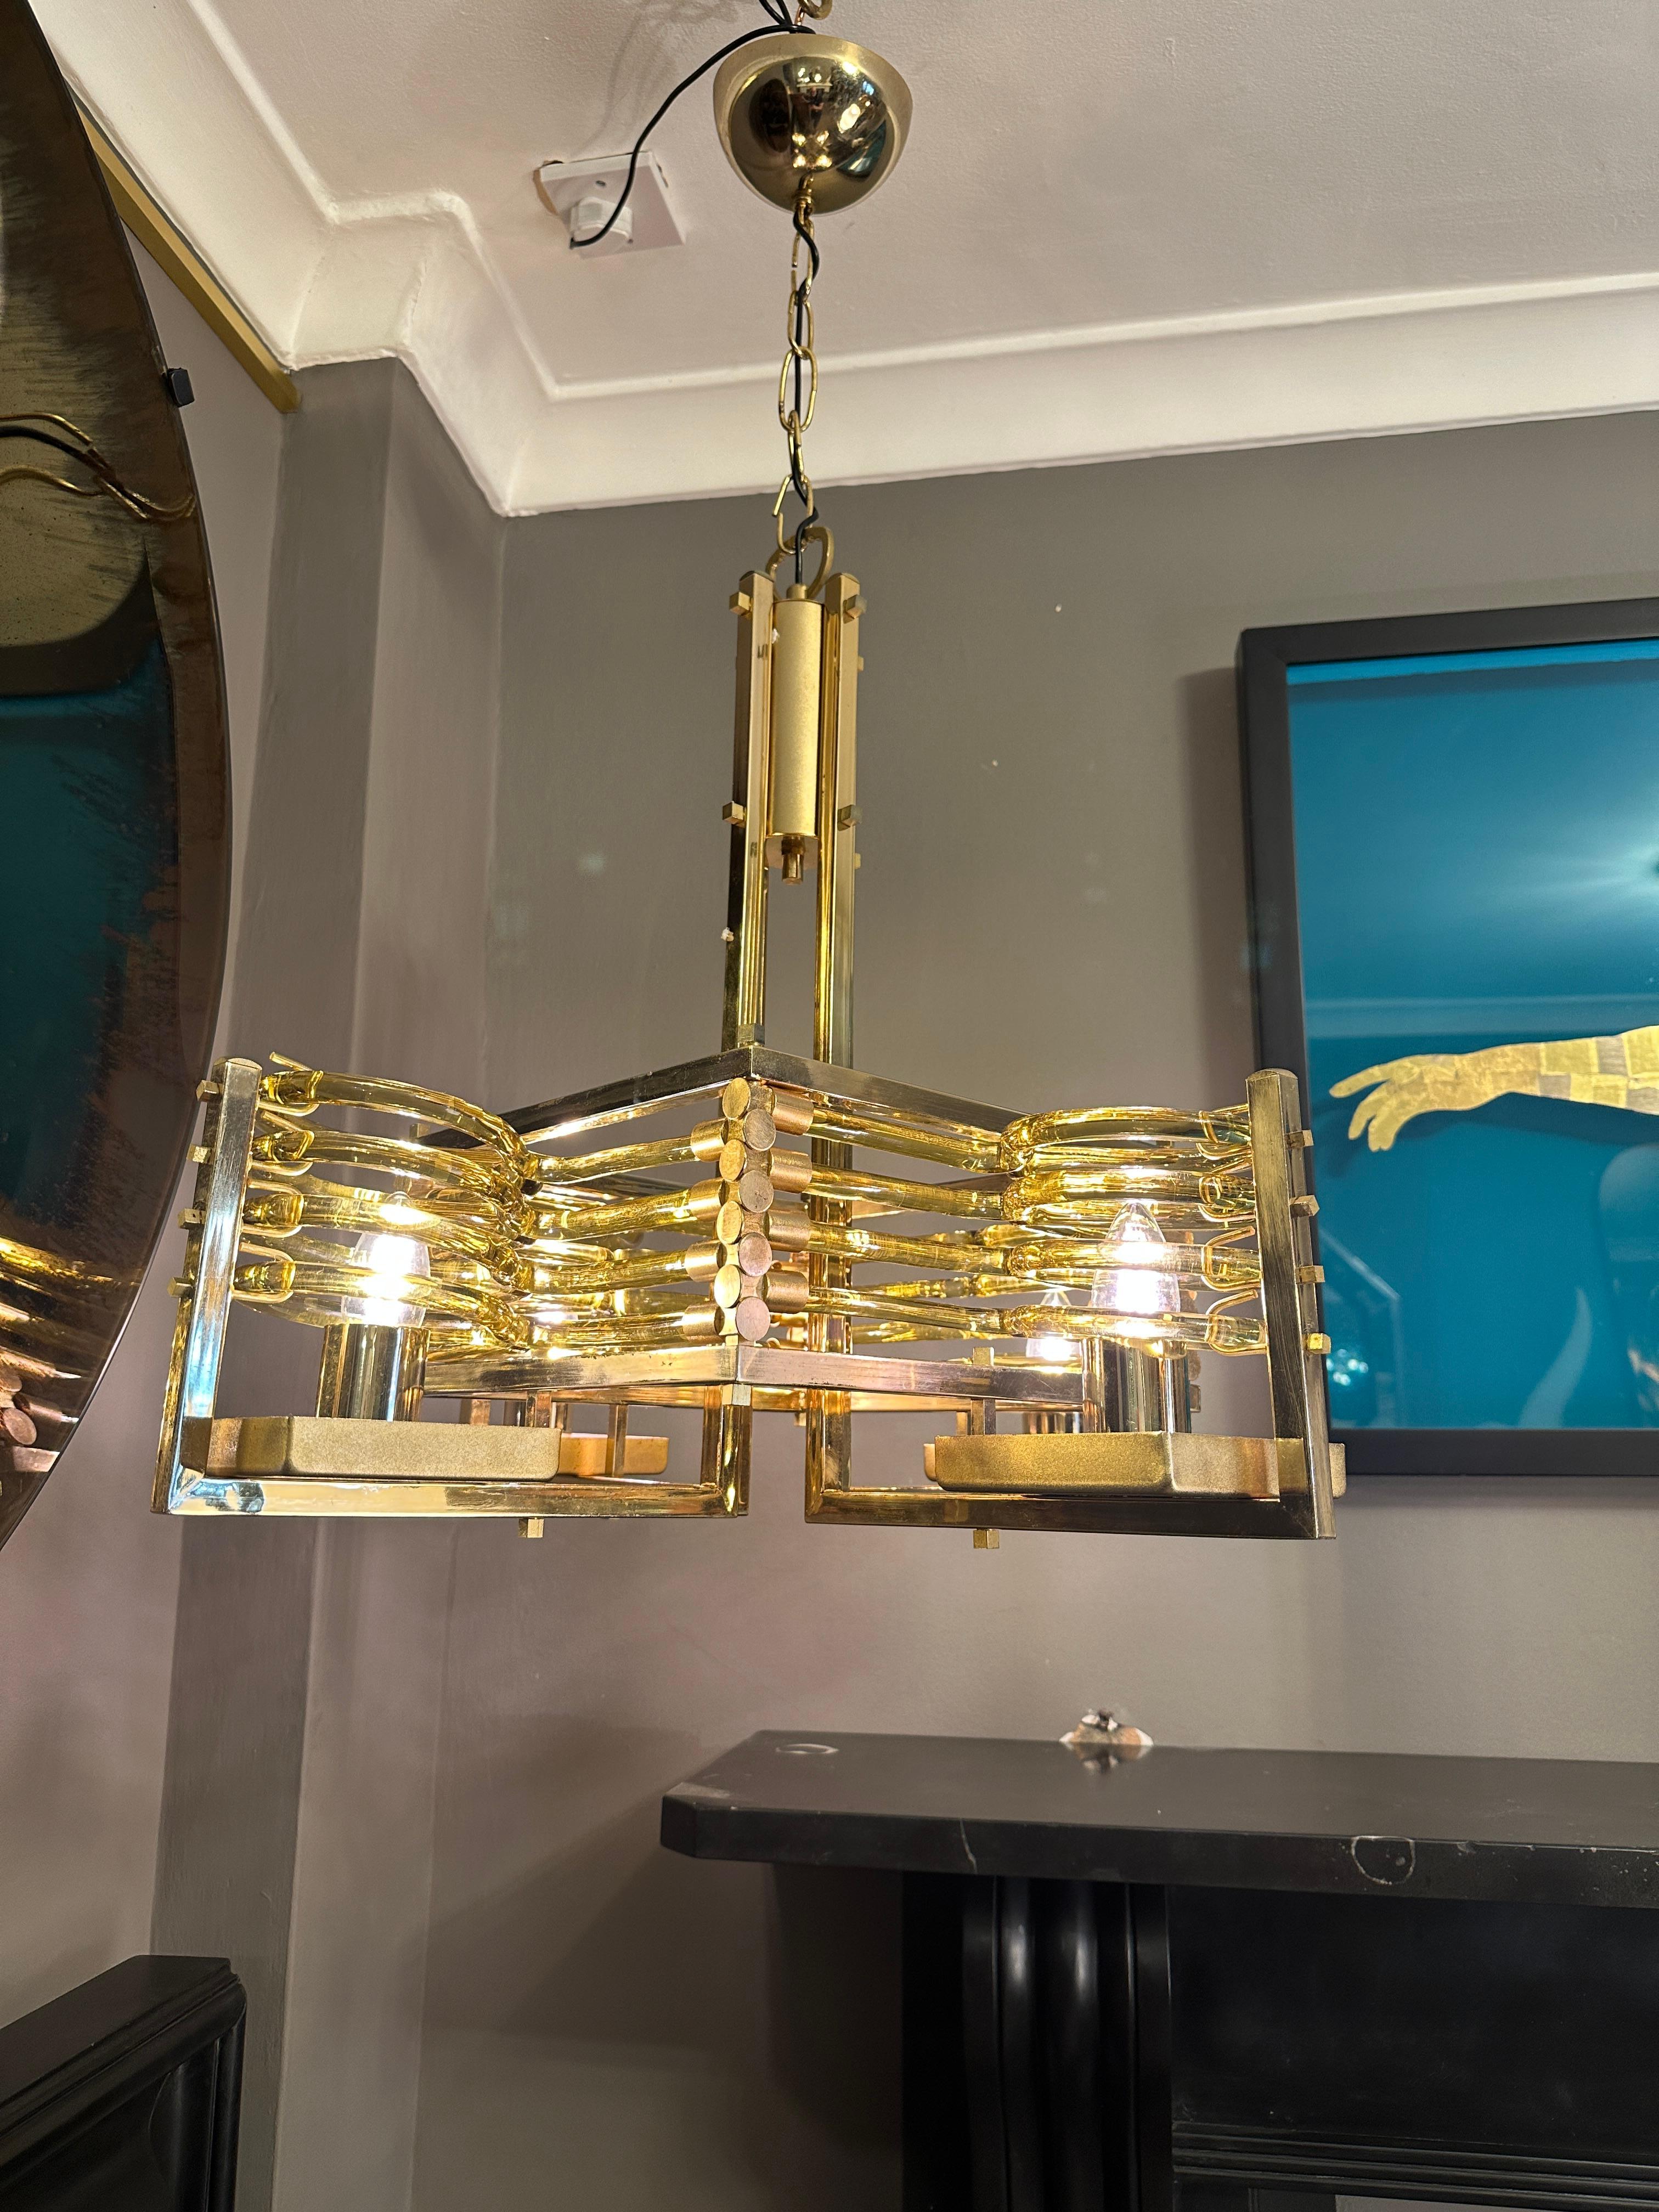 A Rare model by Gaetano Sciolari in Gold Plate and Amber/Gold Murano glass tubed diffusers. Very good quality Mid century pieces typical of Sciolaris early modernistic design 

Angelo Gaetano Sciolari (1927-1994) was the owner of Sciolari Lighting